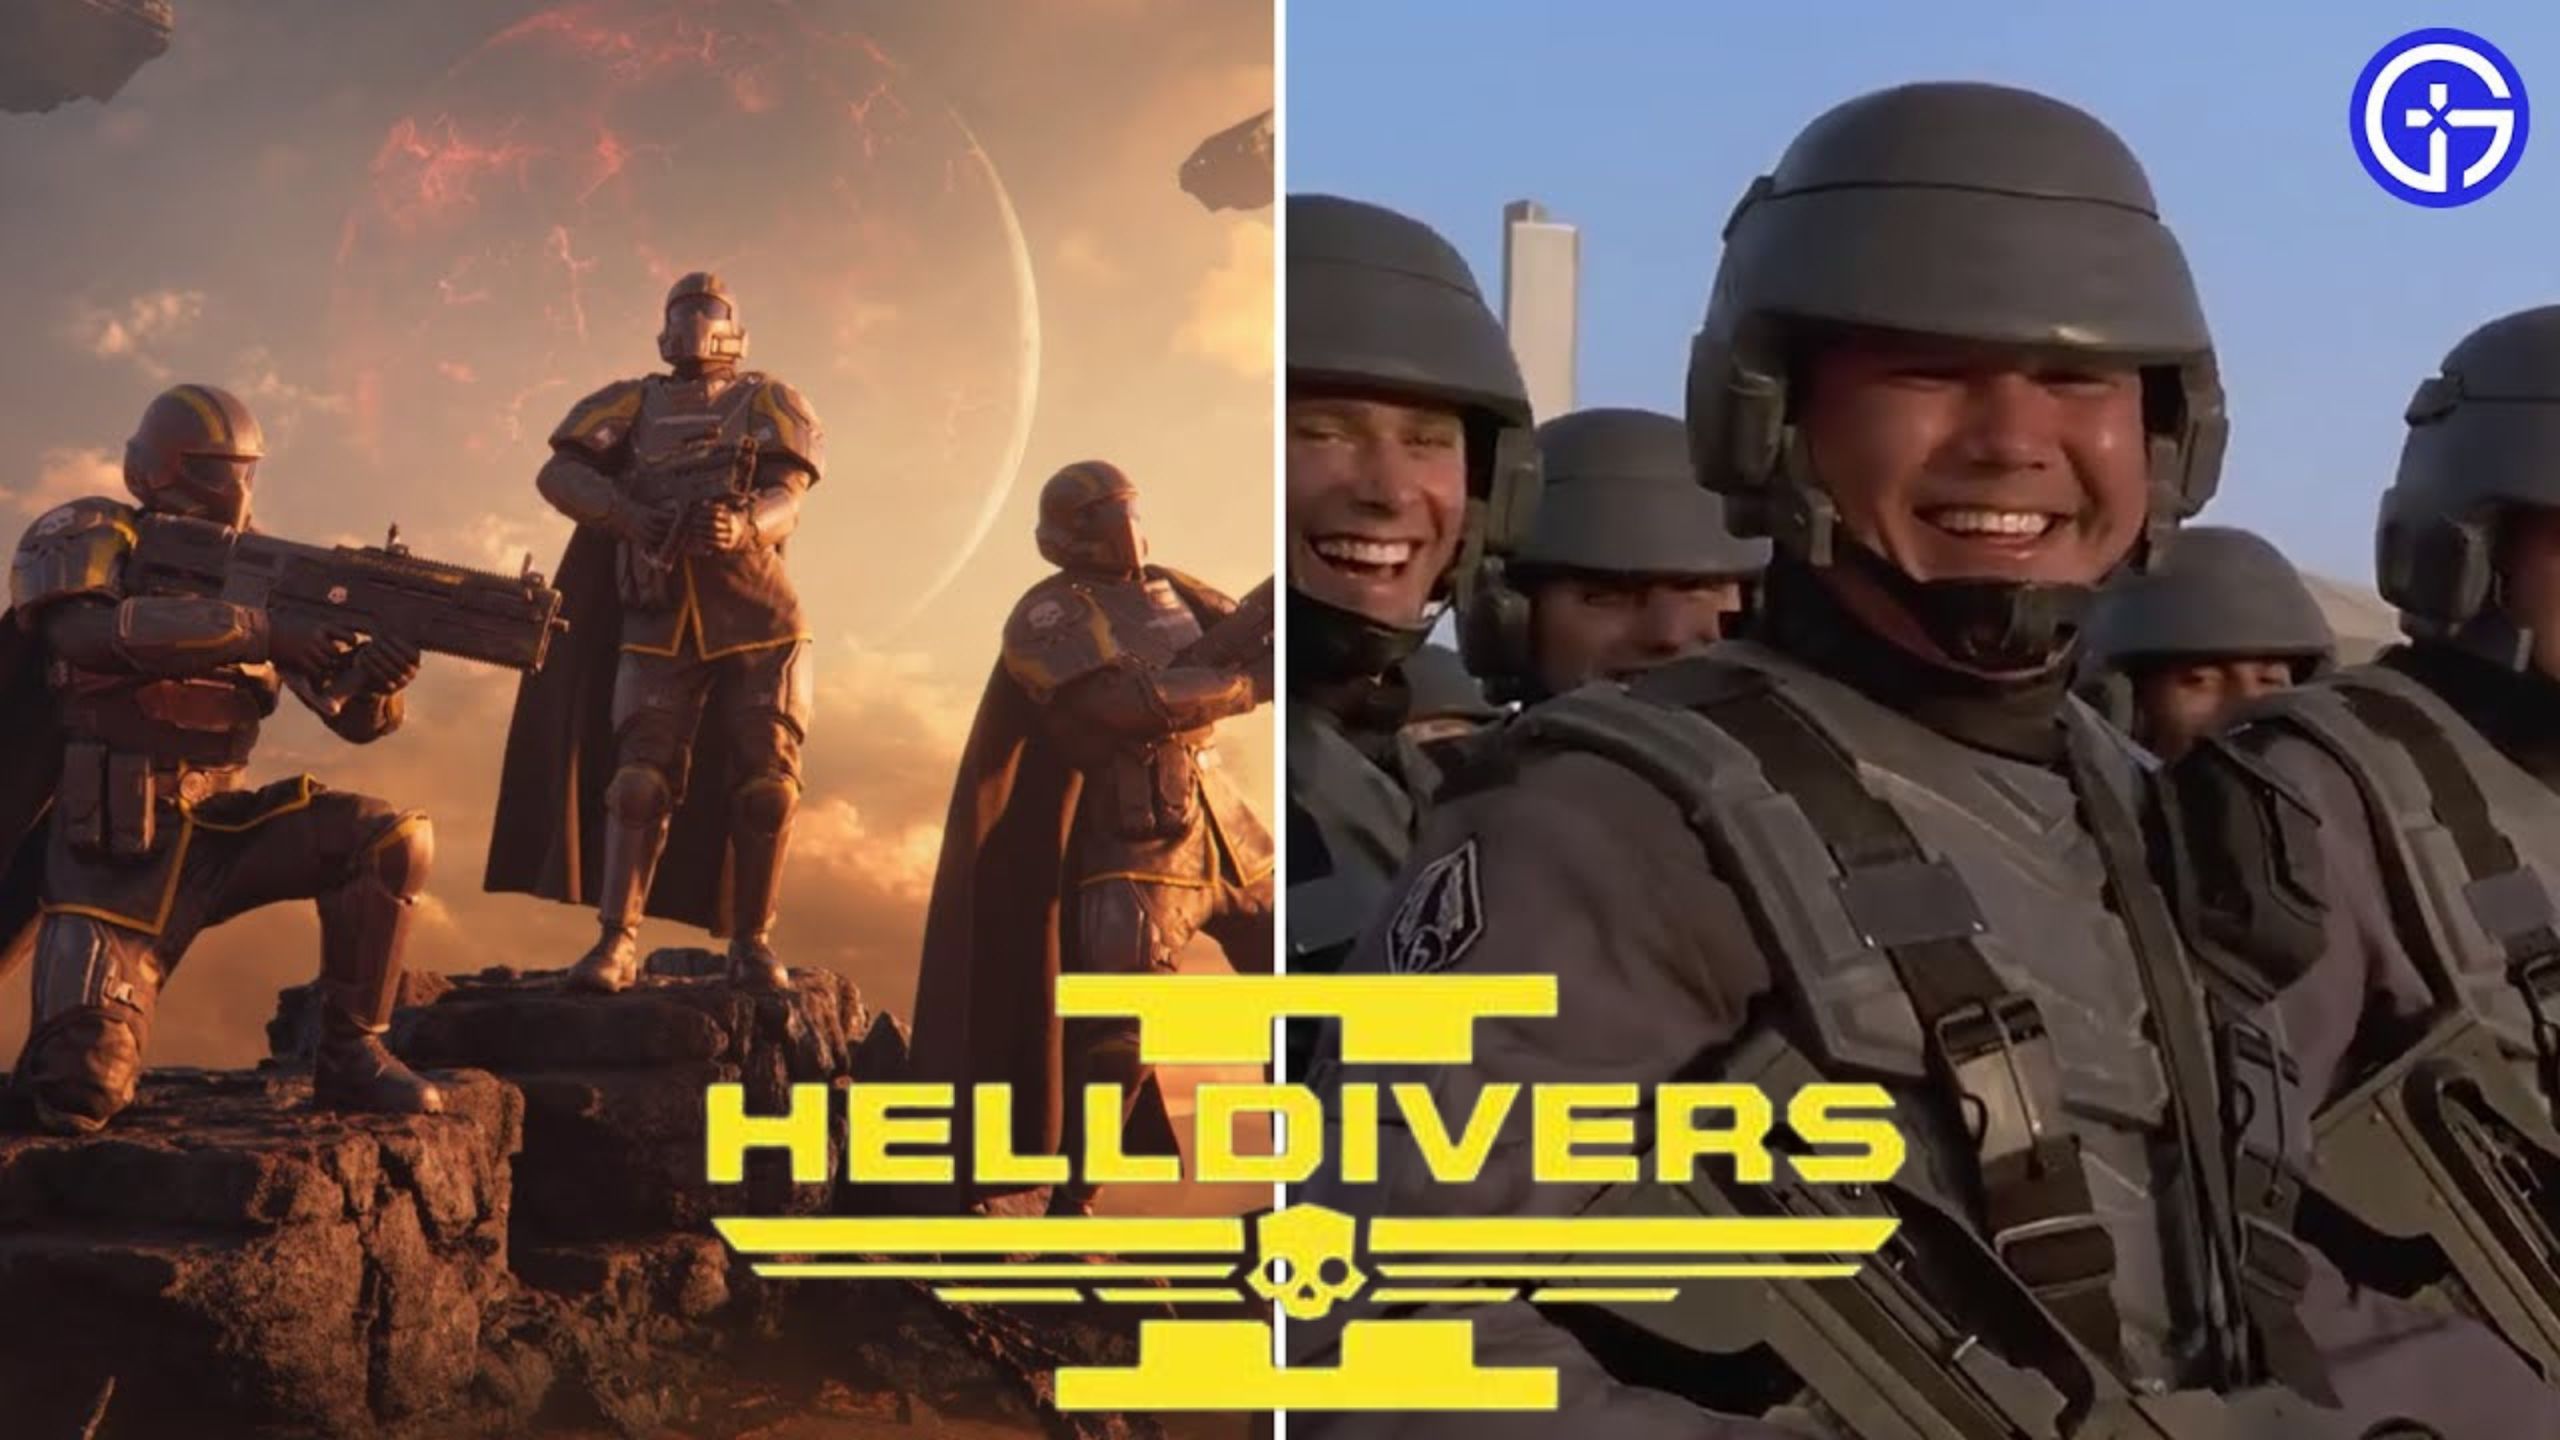 Helldivers 2 Recreates Famous Sci-Fi Moments in the Chaos of Battle